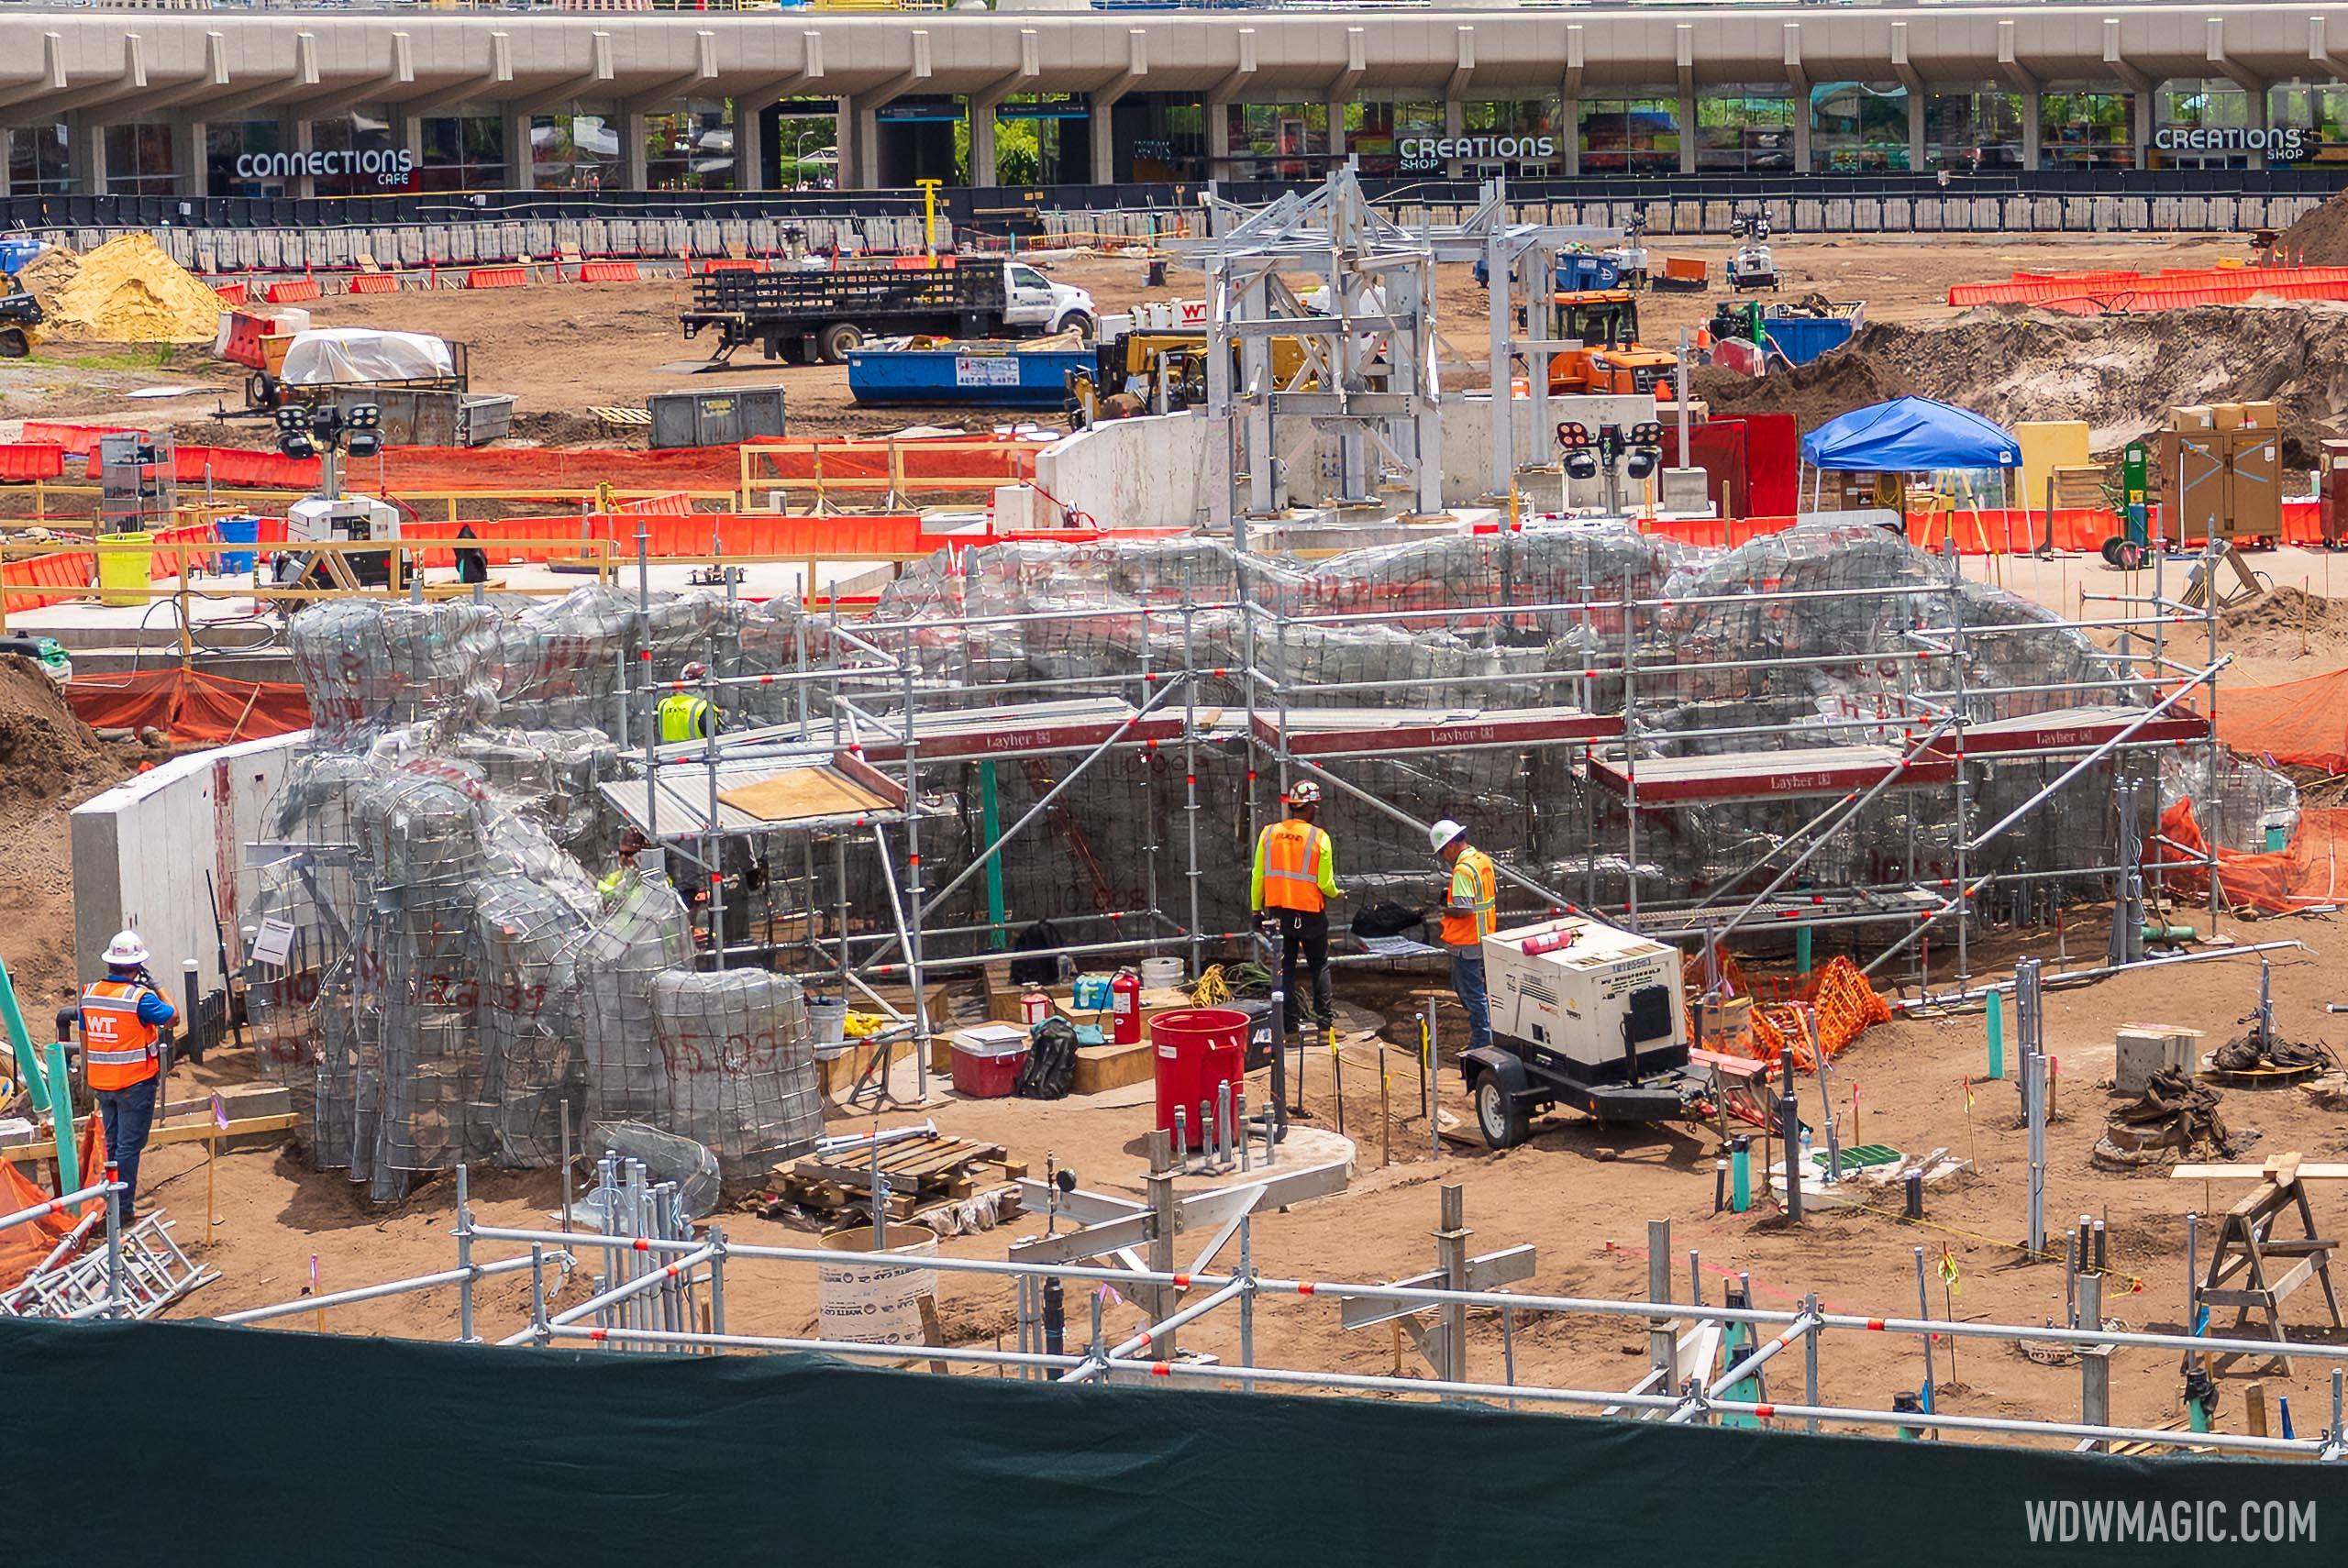 EPCOT's 'Journey of Water inspired by Moana' is showing real progress as rockwork begins to take shape